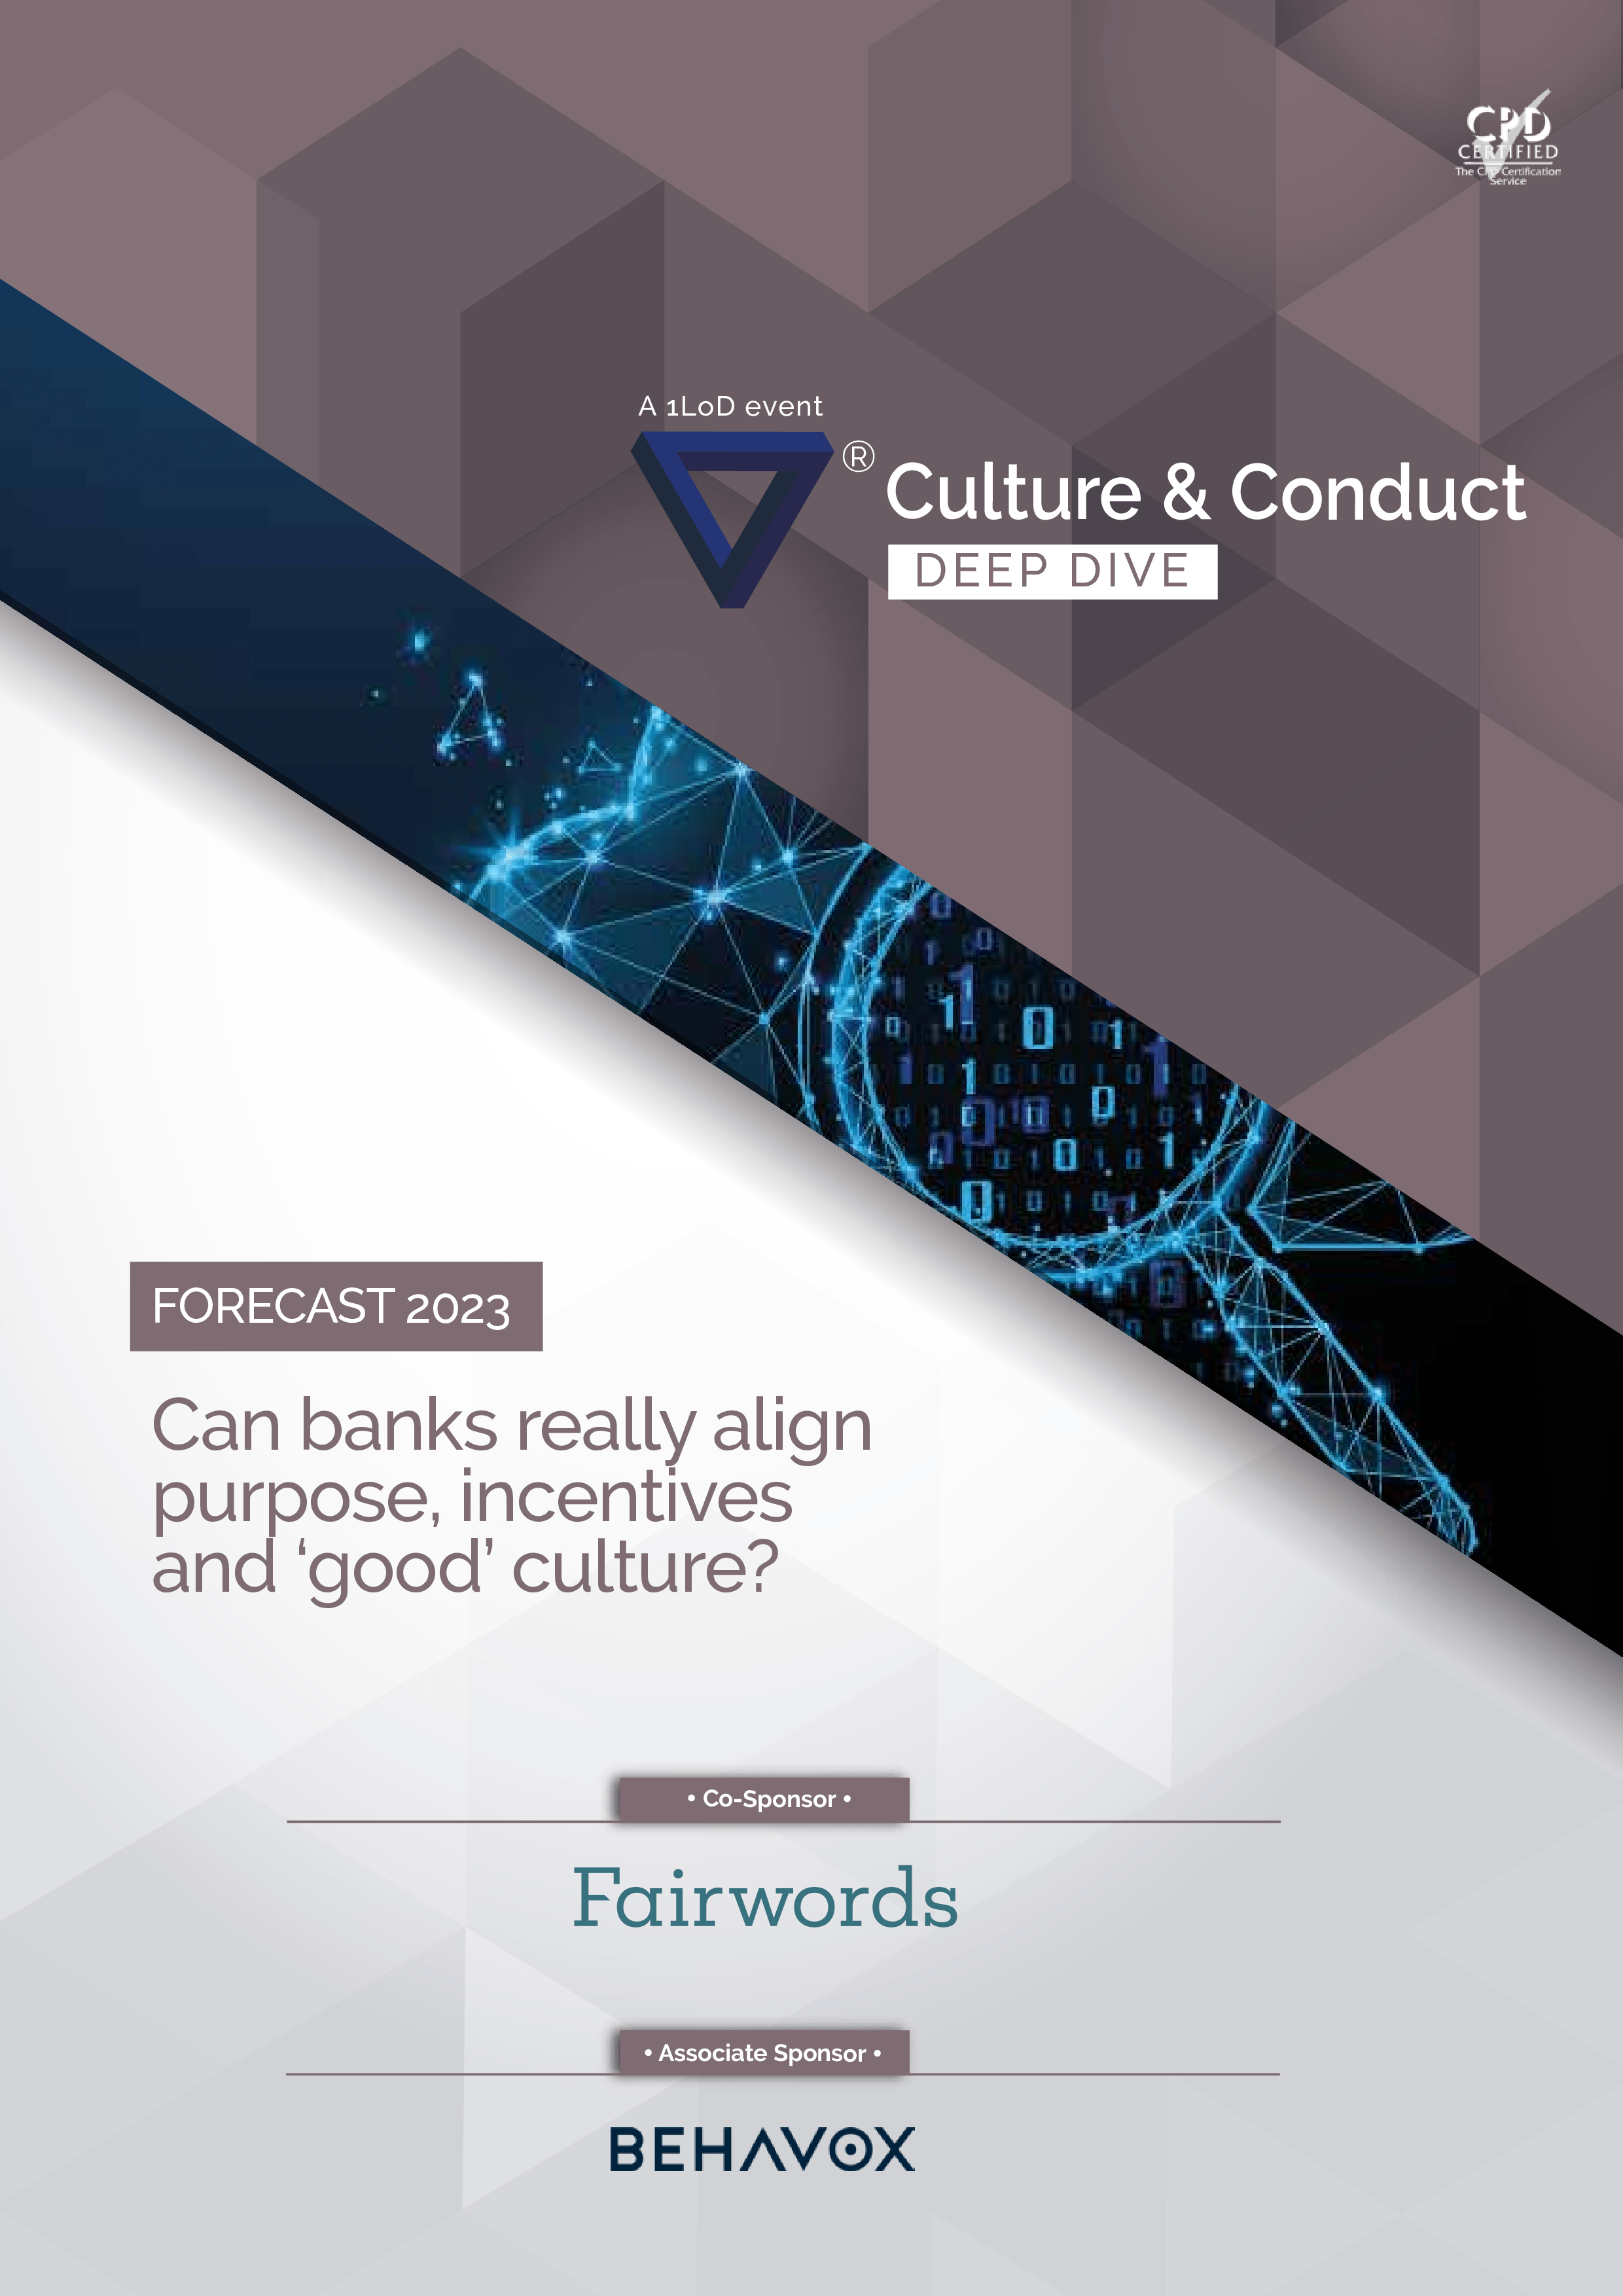 Can banks really align purpose, incentives and ‘good’ culture?